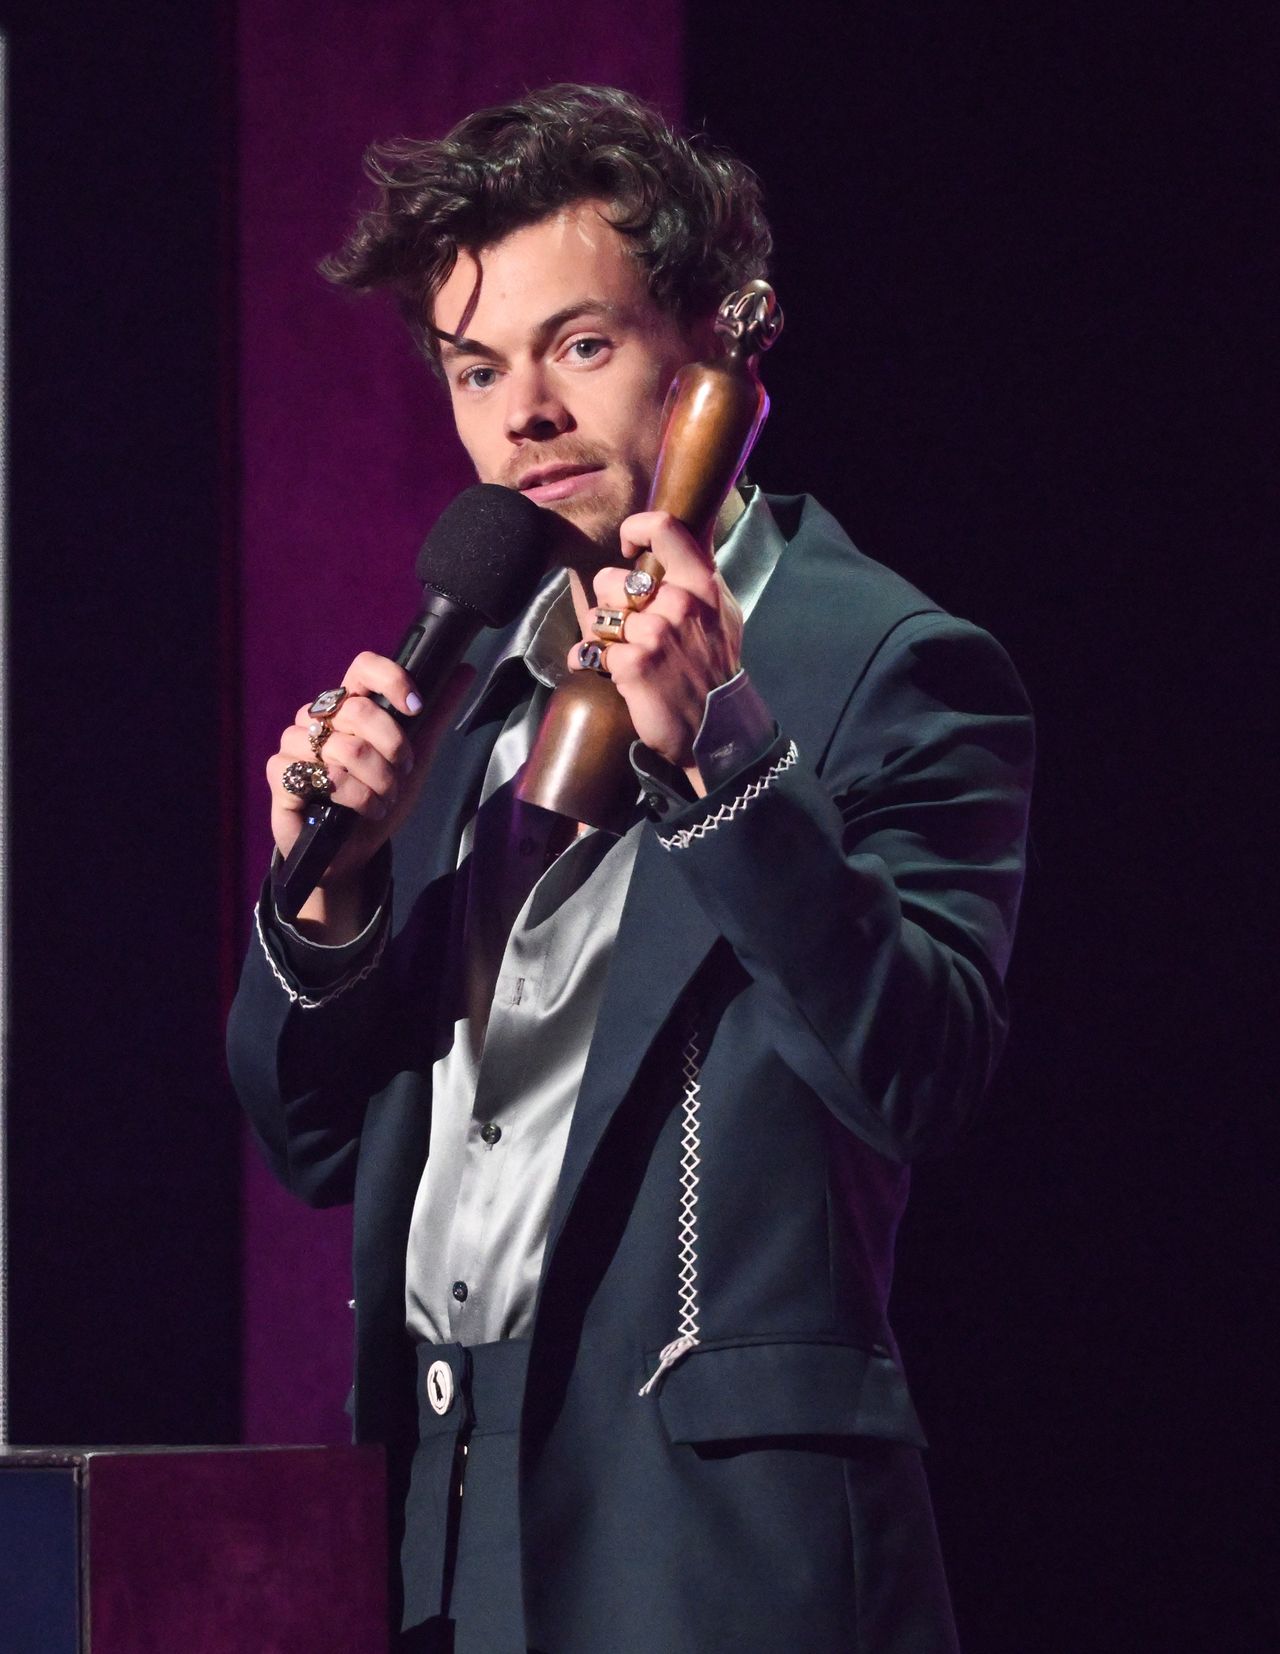 Harry Styles debuted a new hairstyle.